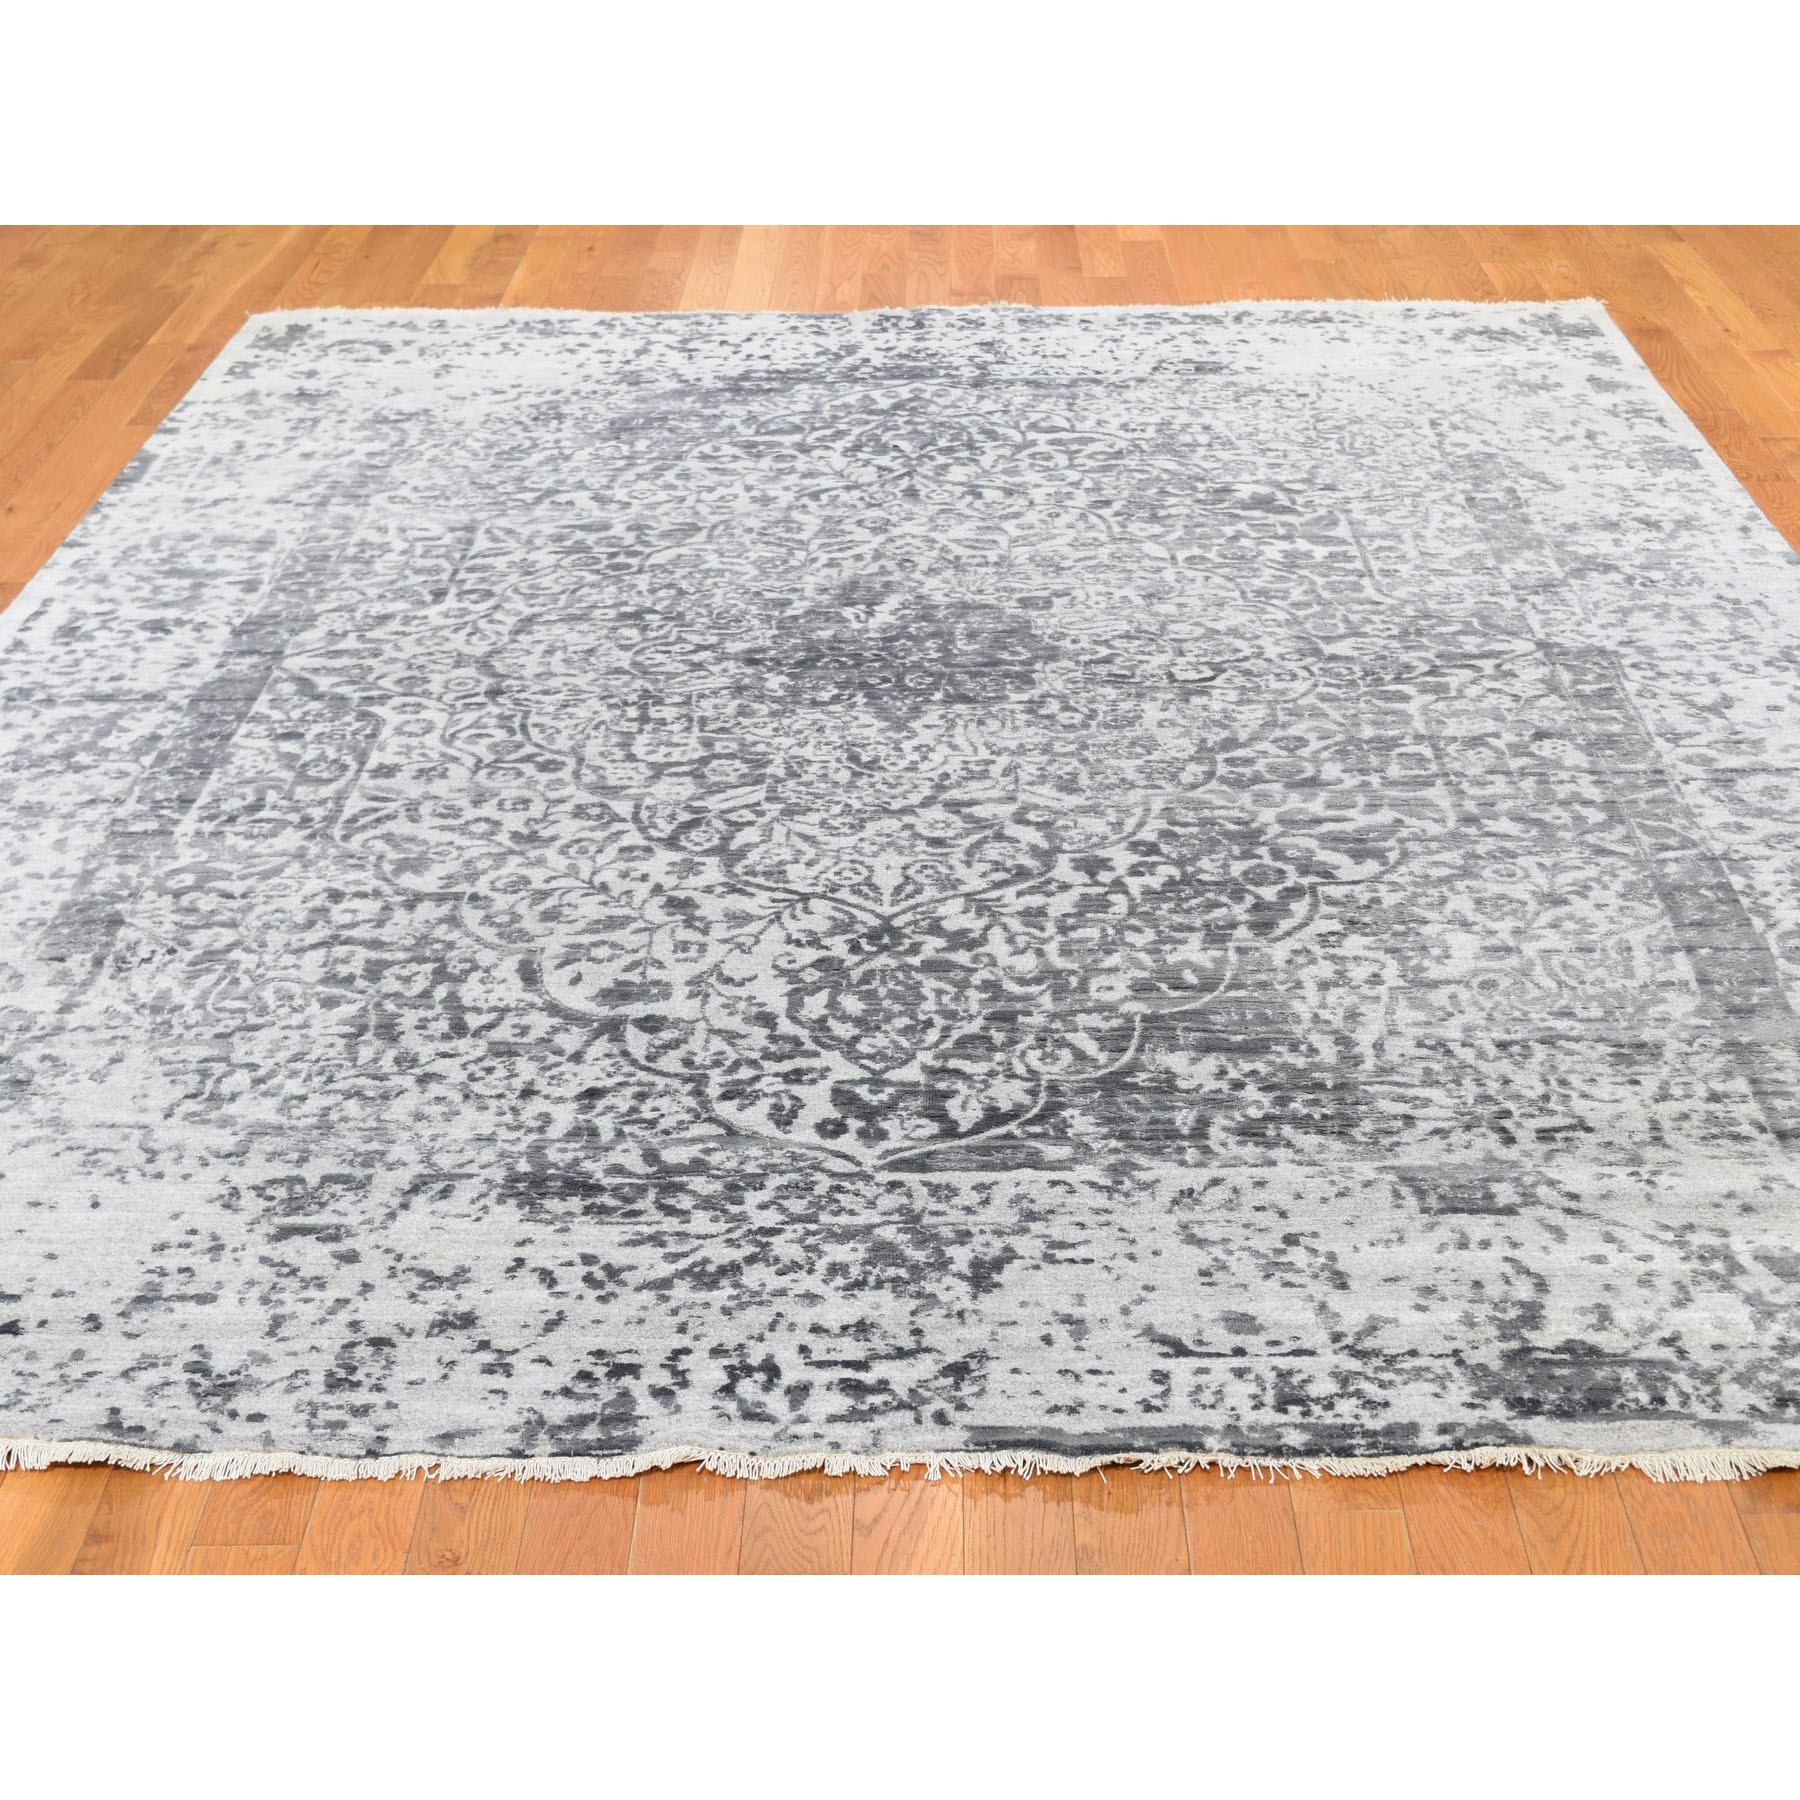 8-x10- Silver-Dark Gray Erased Persian Design Wool and Pure Silk Hand Knotted Oriental Rug 